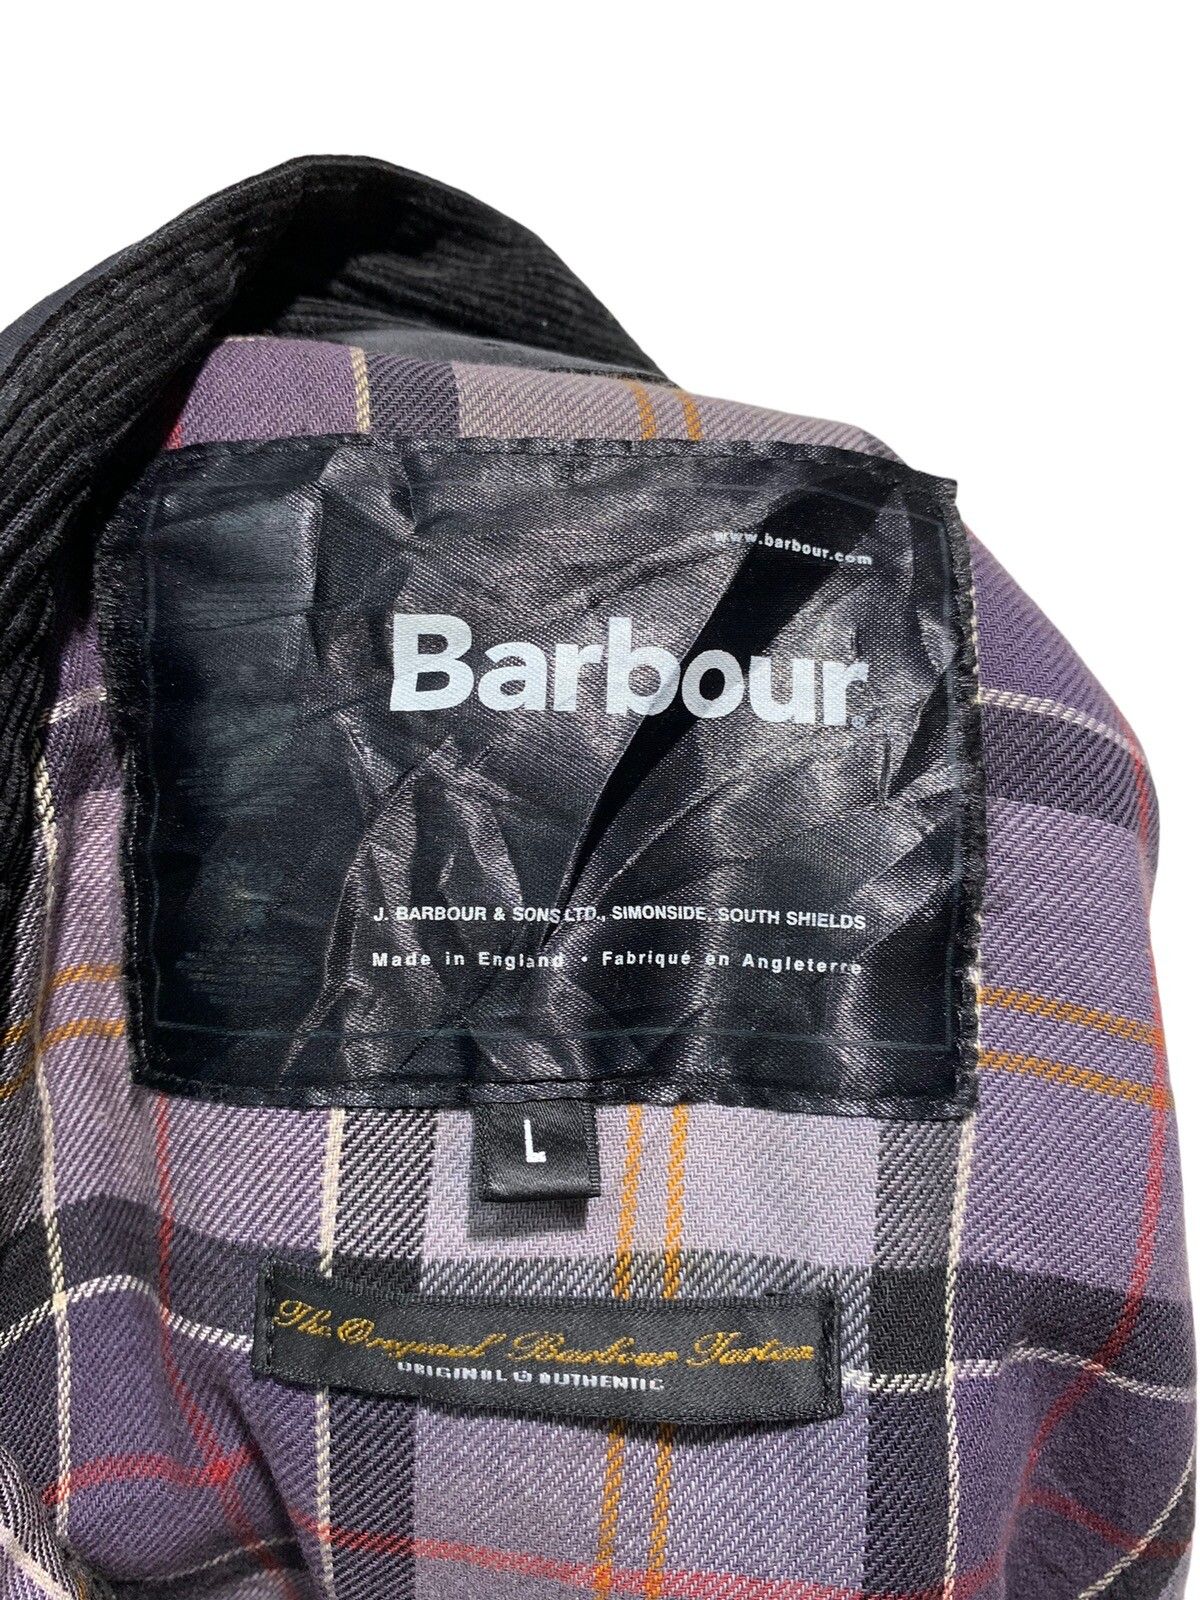 🔥BARBOUR INTERNATIONAL WAXED BOMBER JACKETS - 13